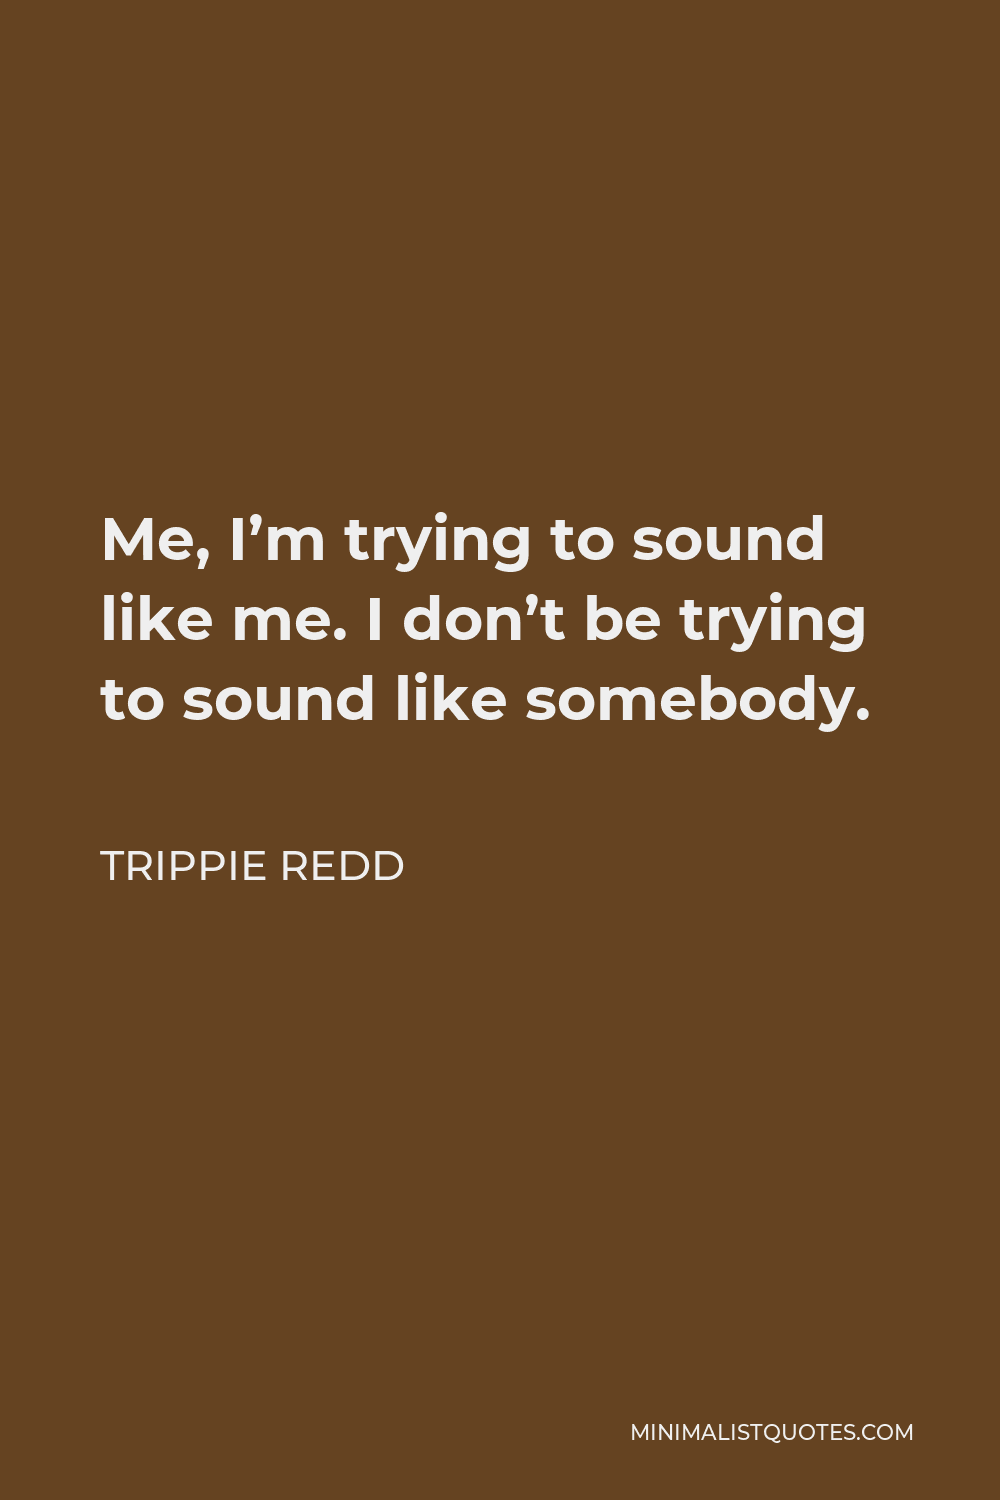 Trippie Redd Quote - Me, I’m trying to sound like me. I don’t be trying to sound like somebody.